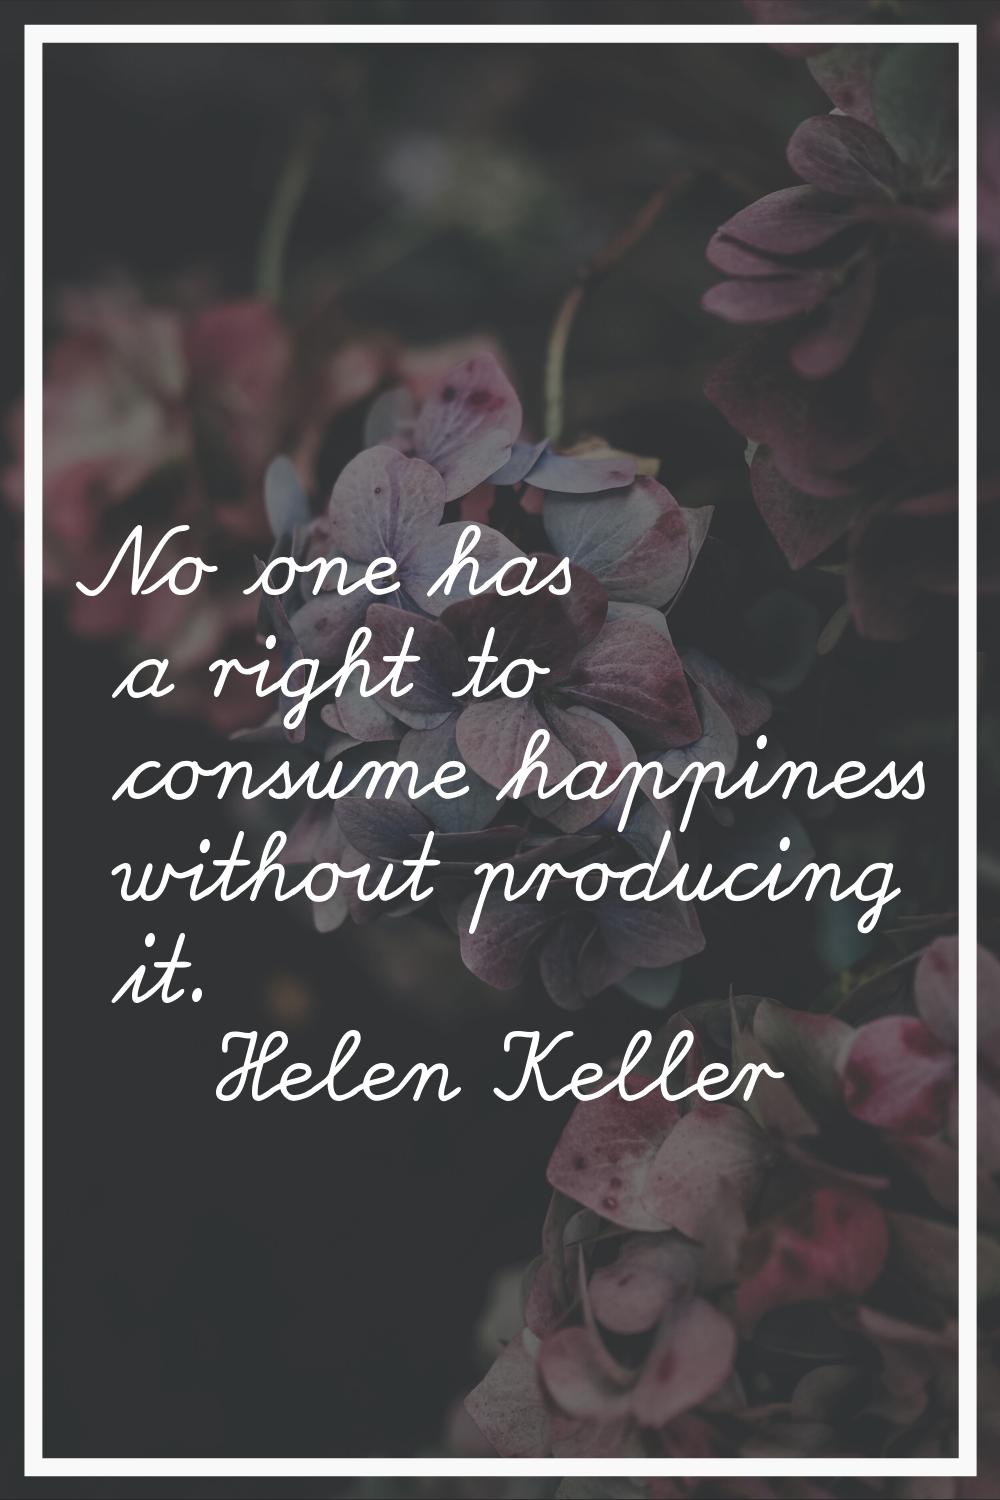 No one has a right to consume happiness without producing it.